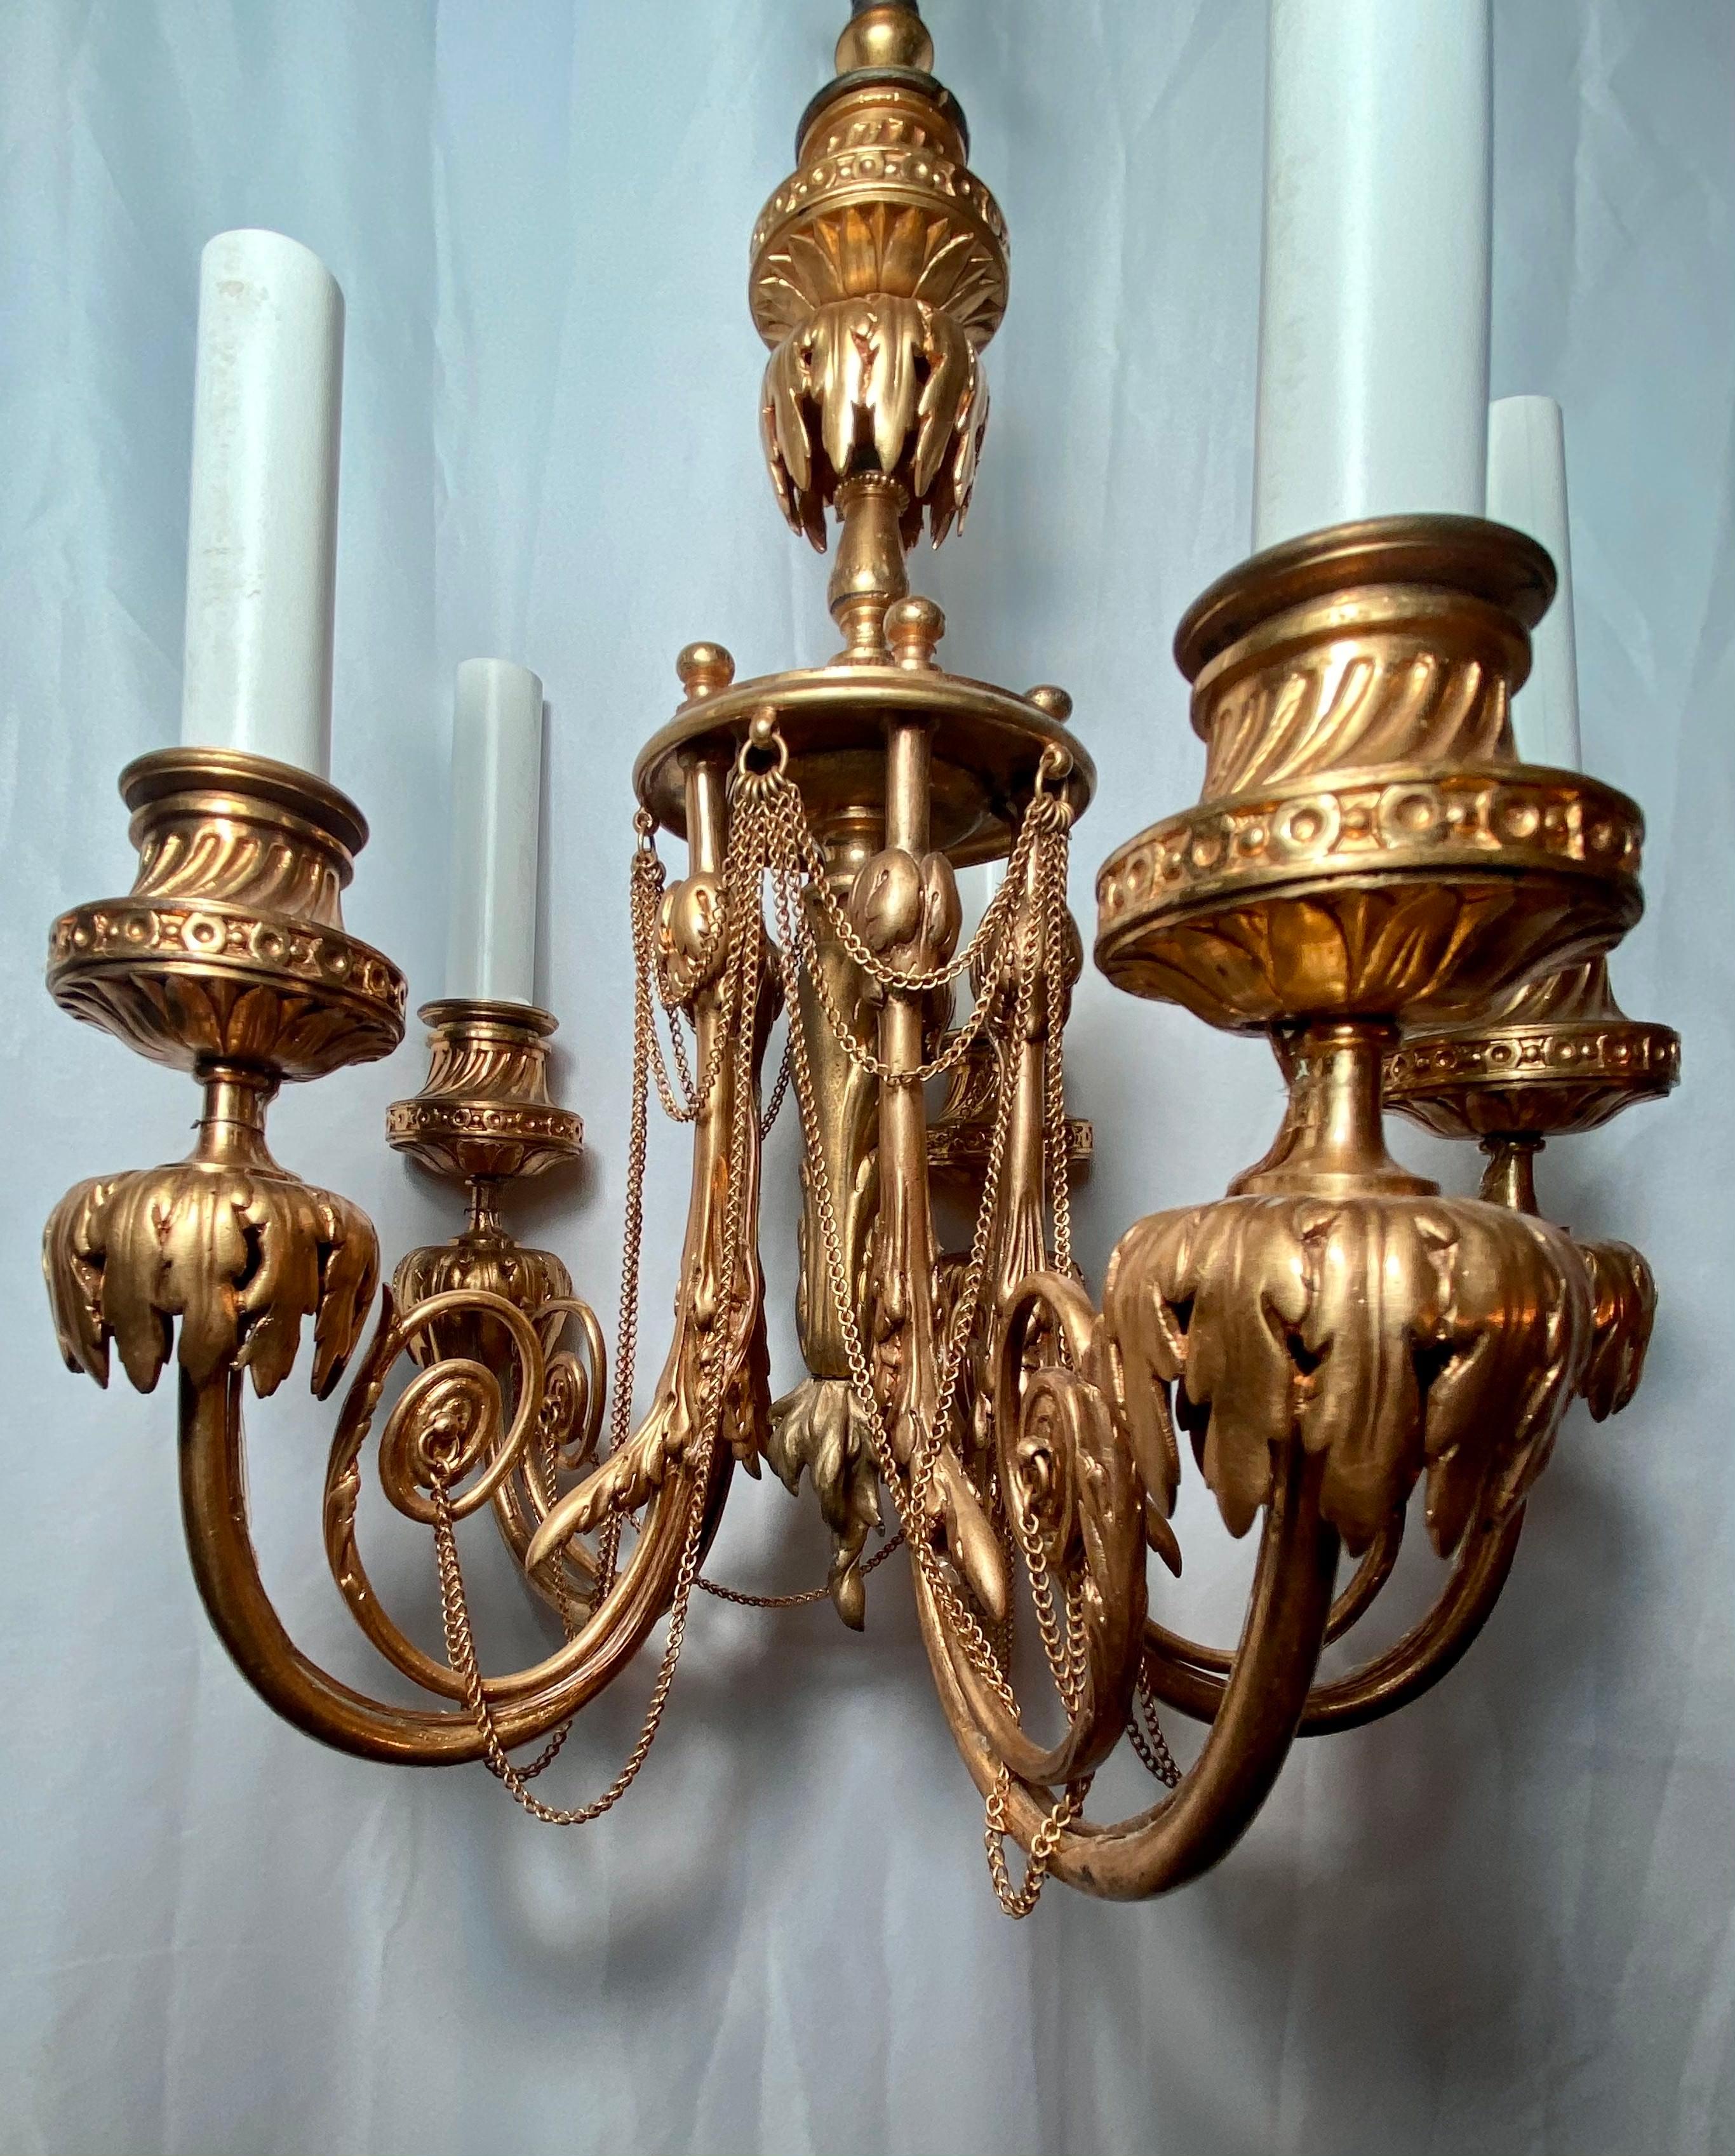 Small antique 19th century French bronze D'Ore chandelier.
One of a pair (Listed and Sold Individually).